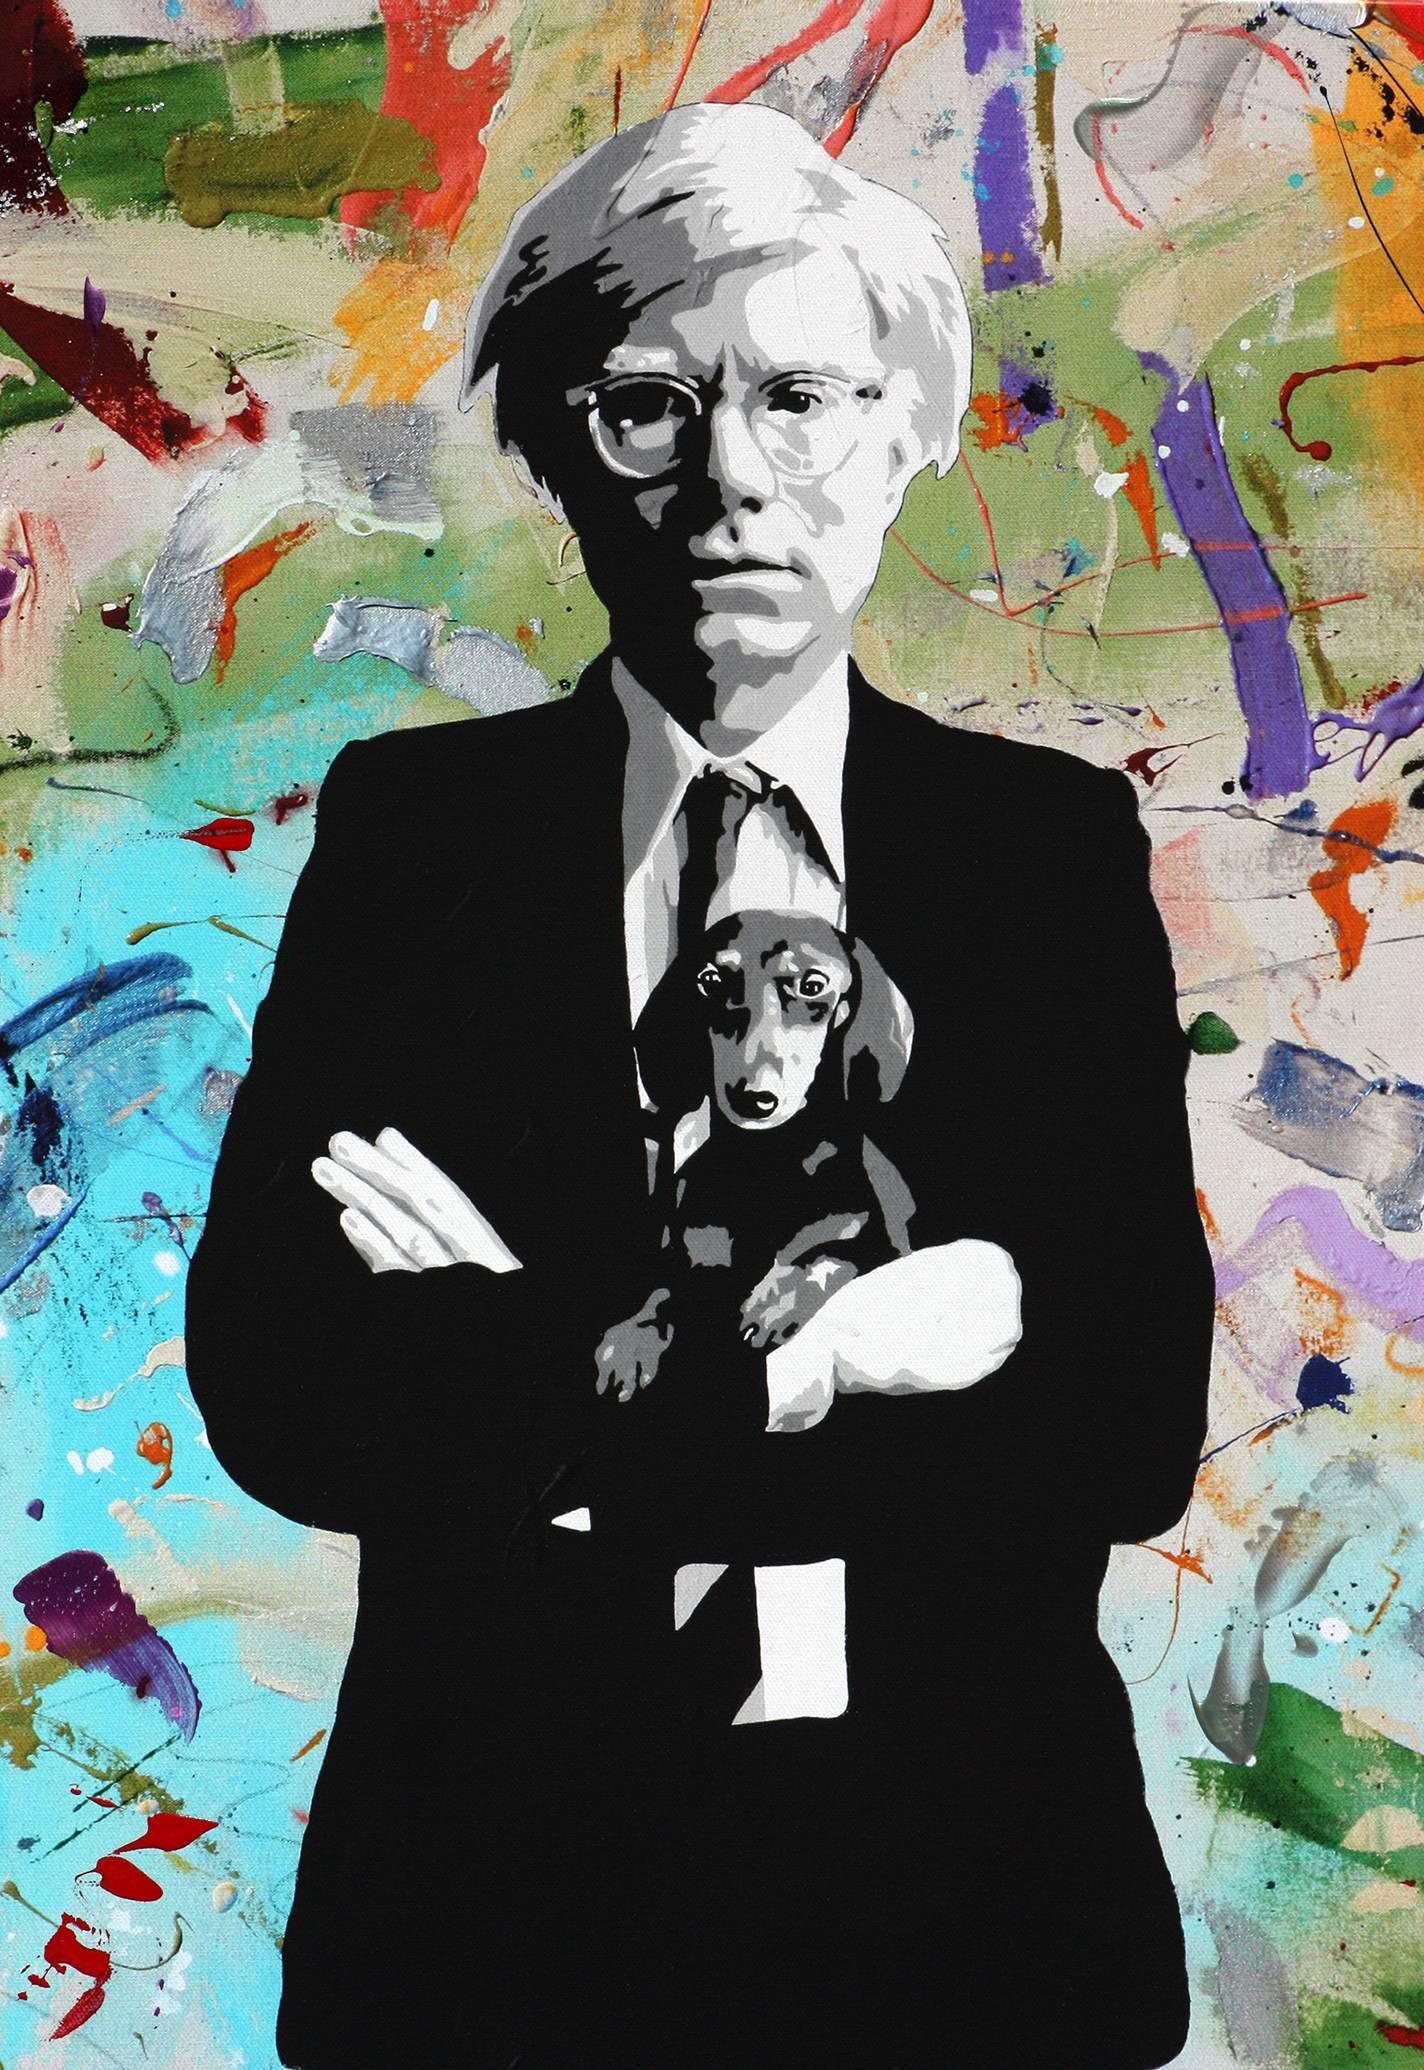 "Amos and Andy Warhol"  mixed media acrylic and archival ink on canvas - Mixed Media Art by Ceravolo